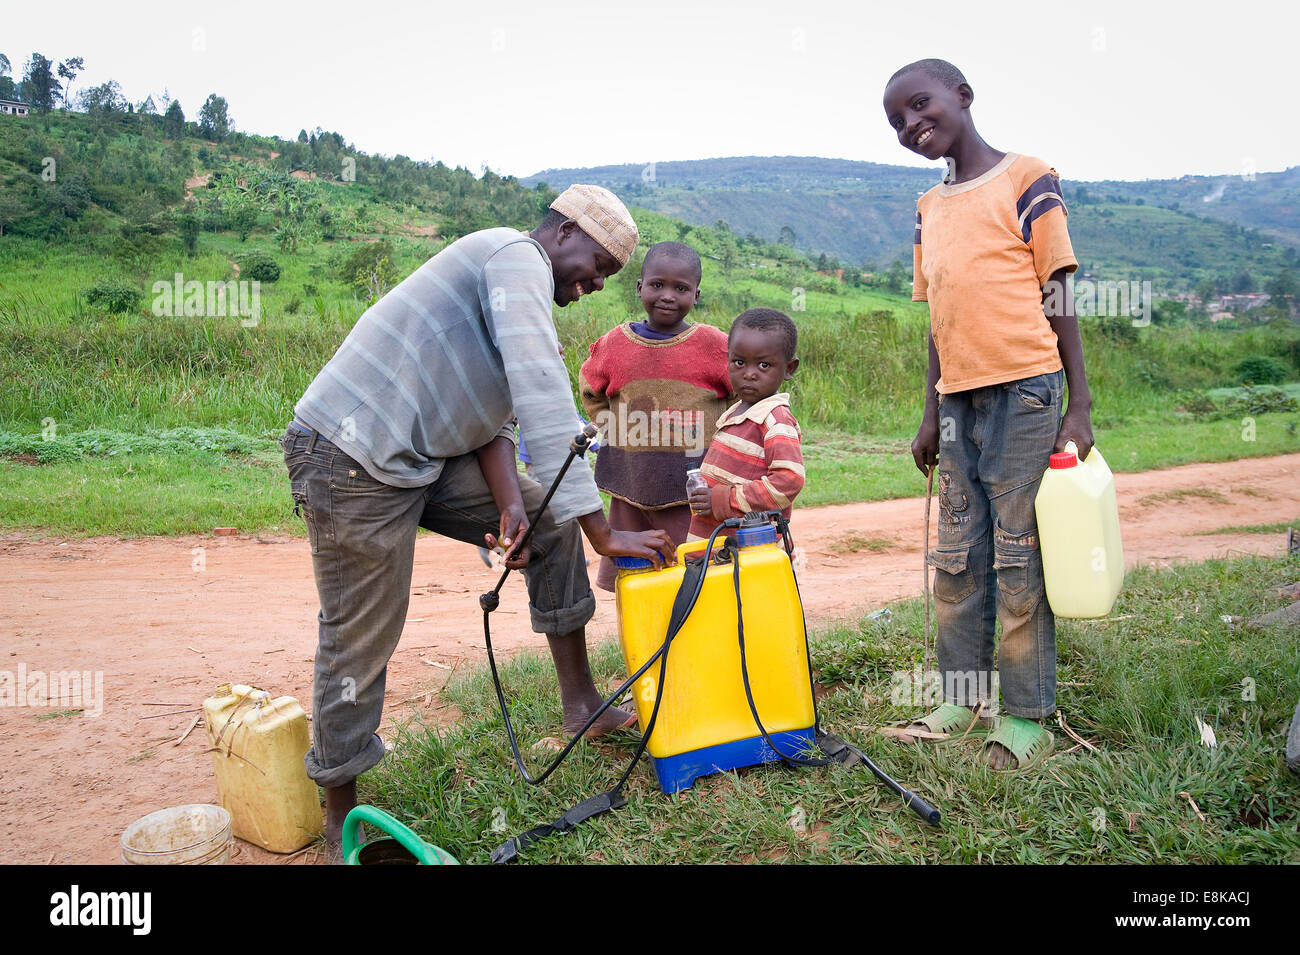 RWANDA, NJABORONGO VALLEY: A man sprays pesticides on crops on a field in Africa. Stock Photo